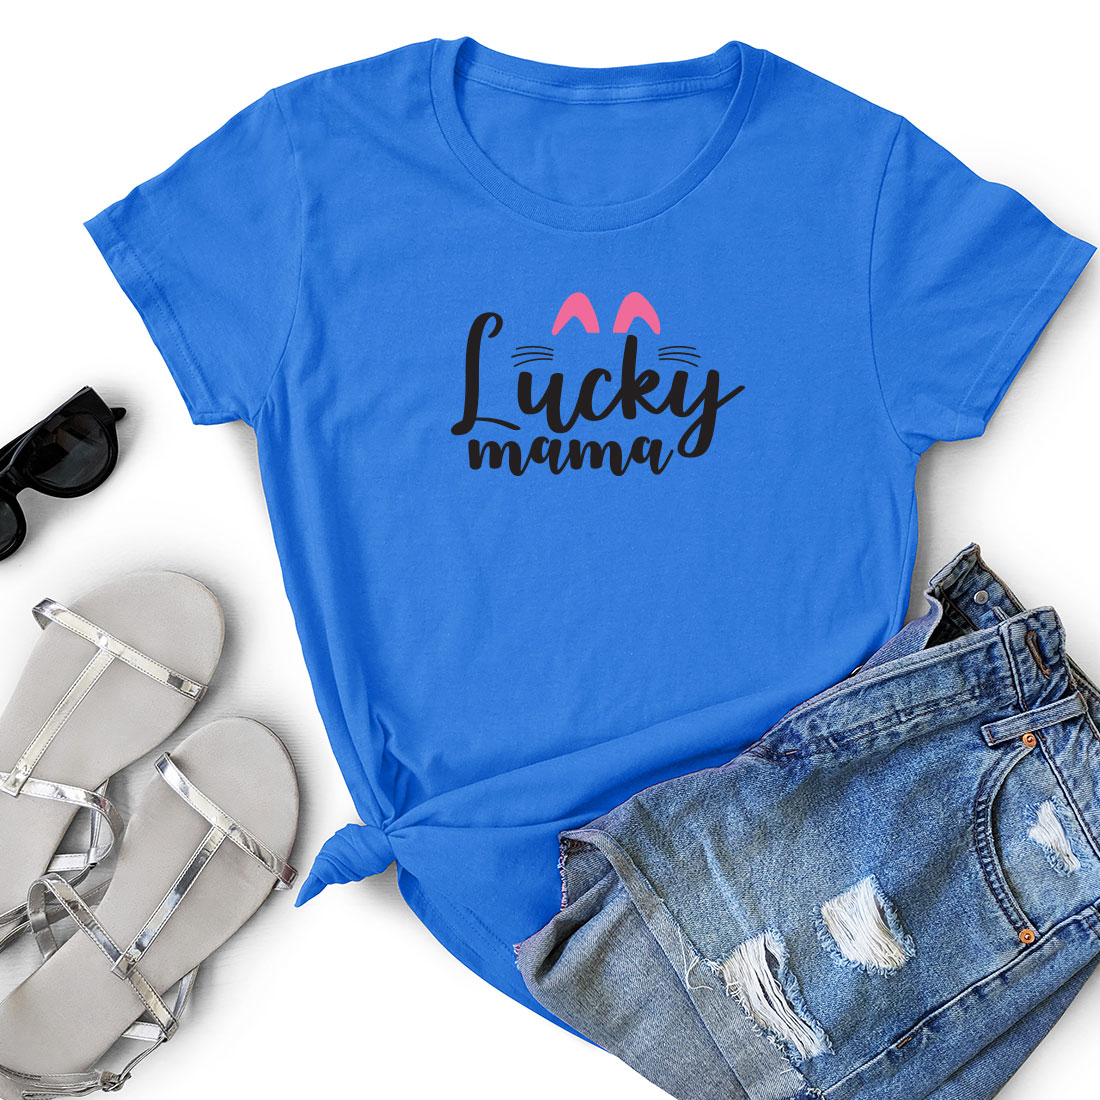 T - shirt that says lucky mama next to a pair of high heeled.